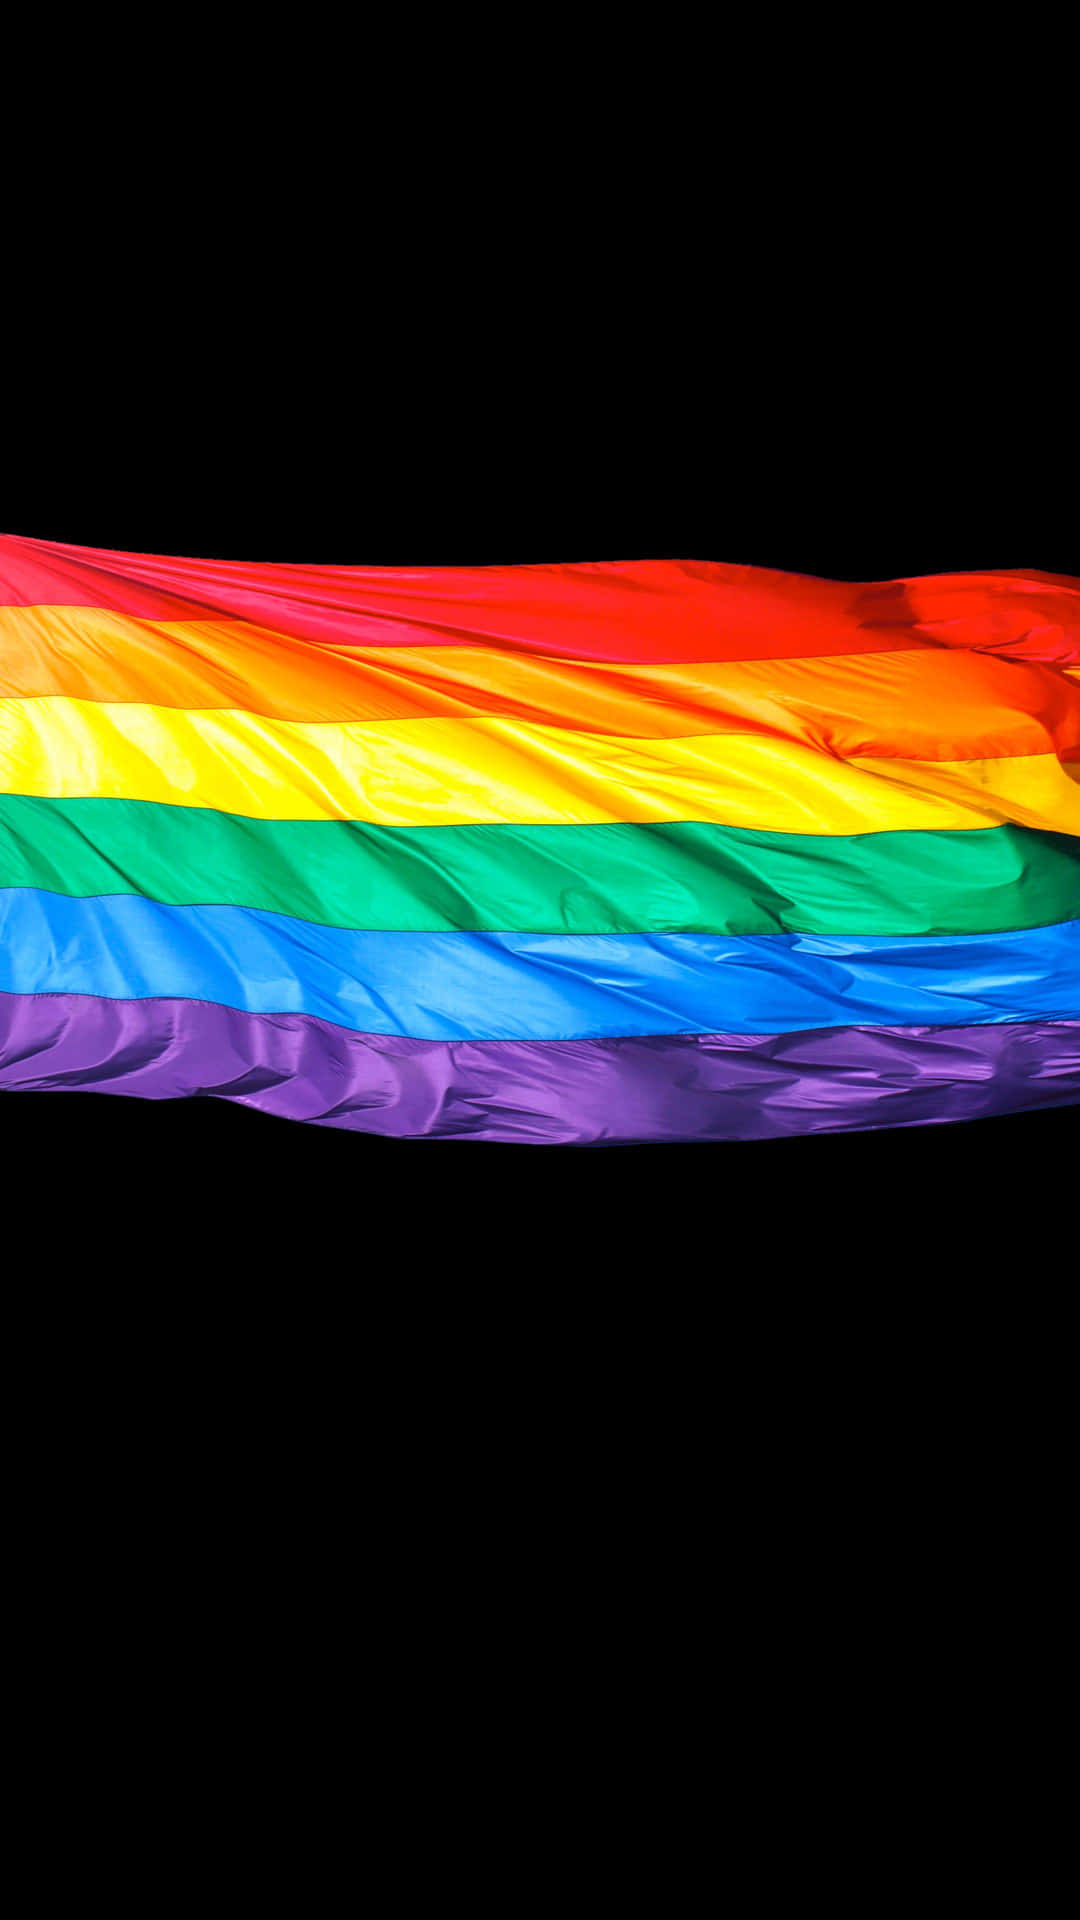 Show Pride with a stylish LGBT iPhone Wallpaper